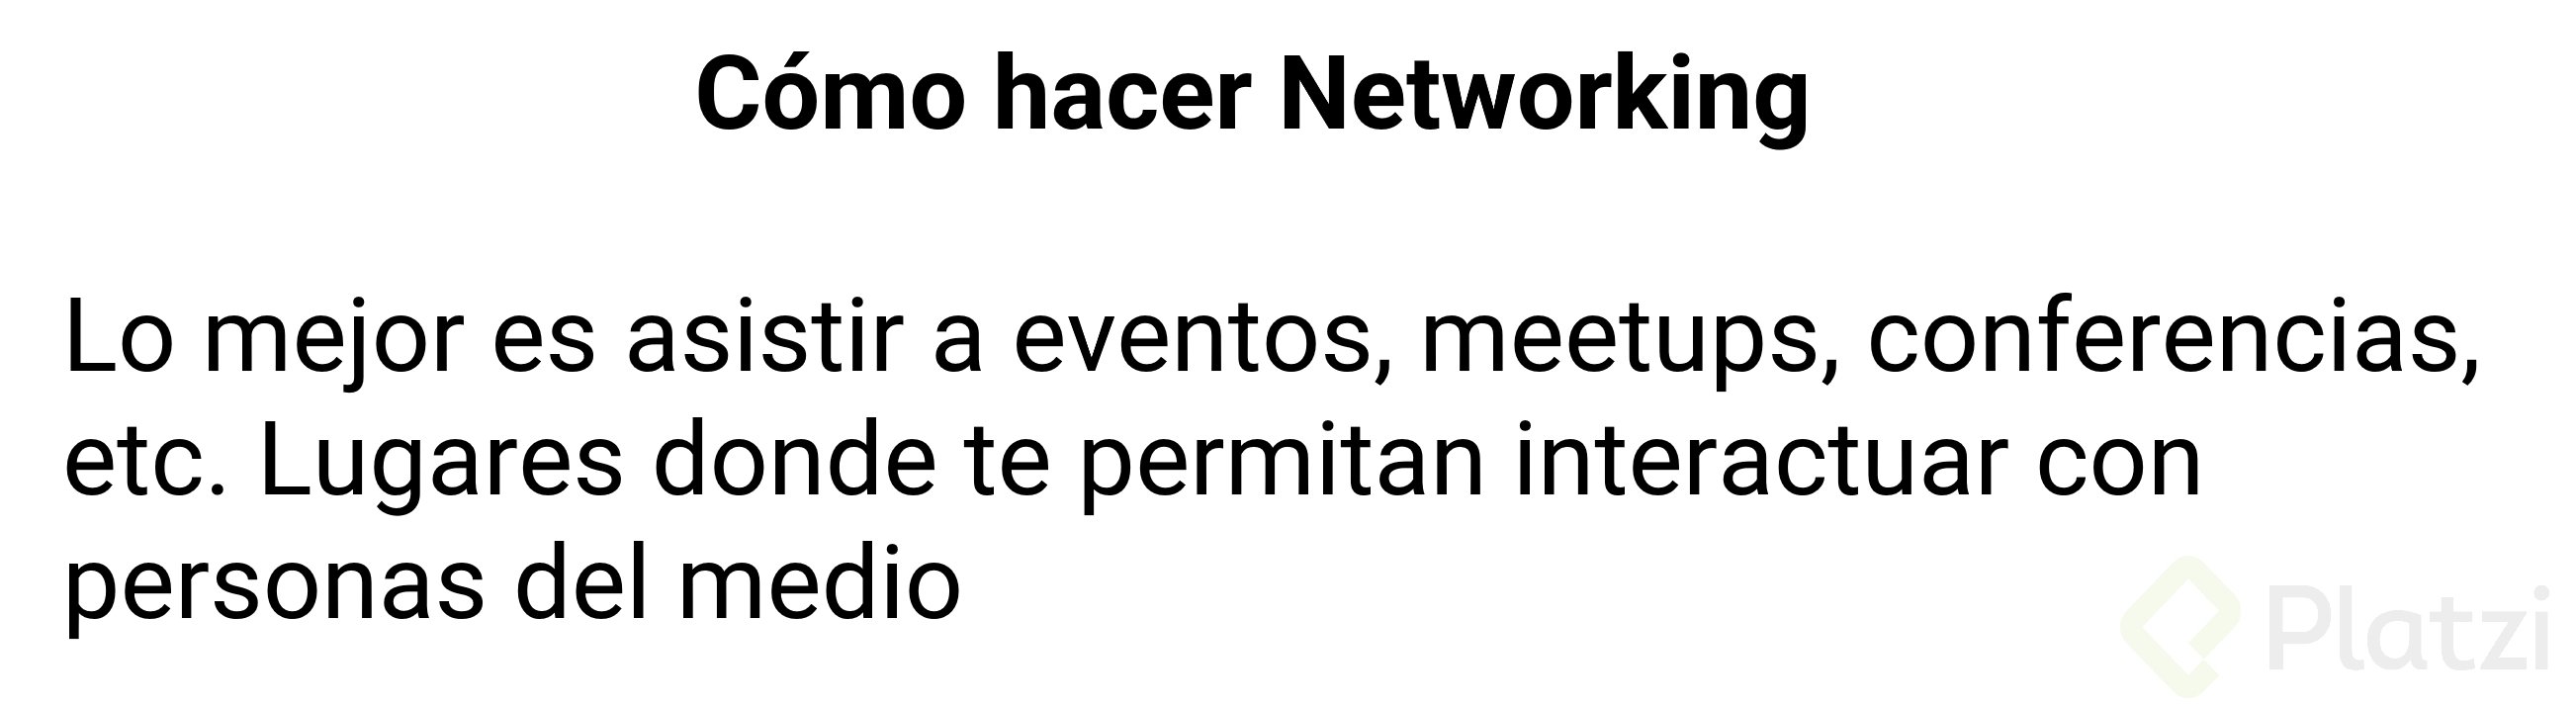 CÃ³mo hacer Networking.png